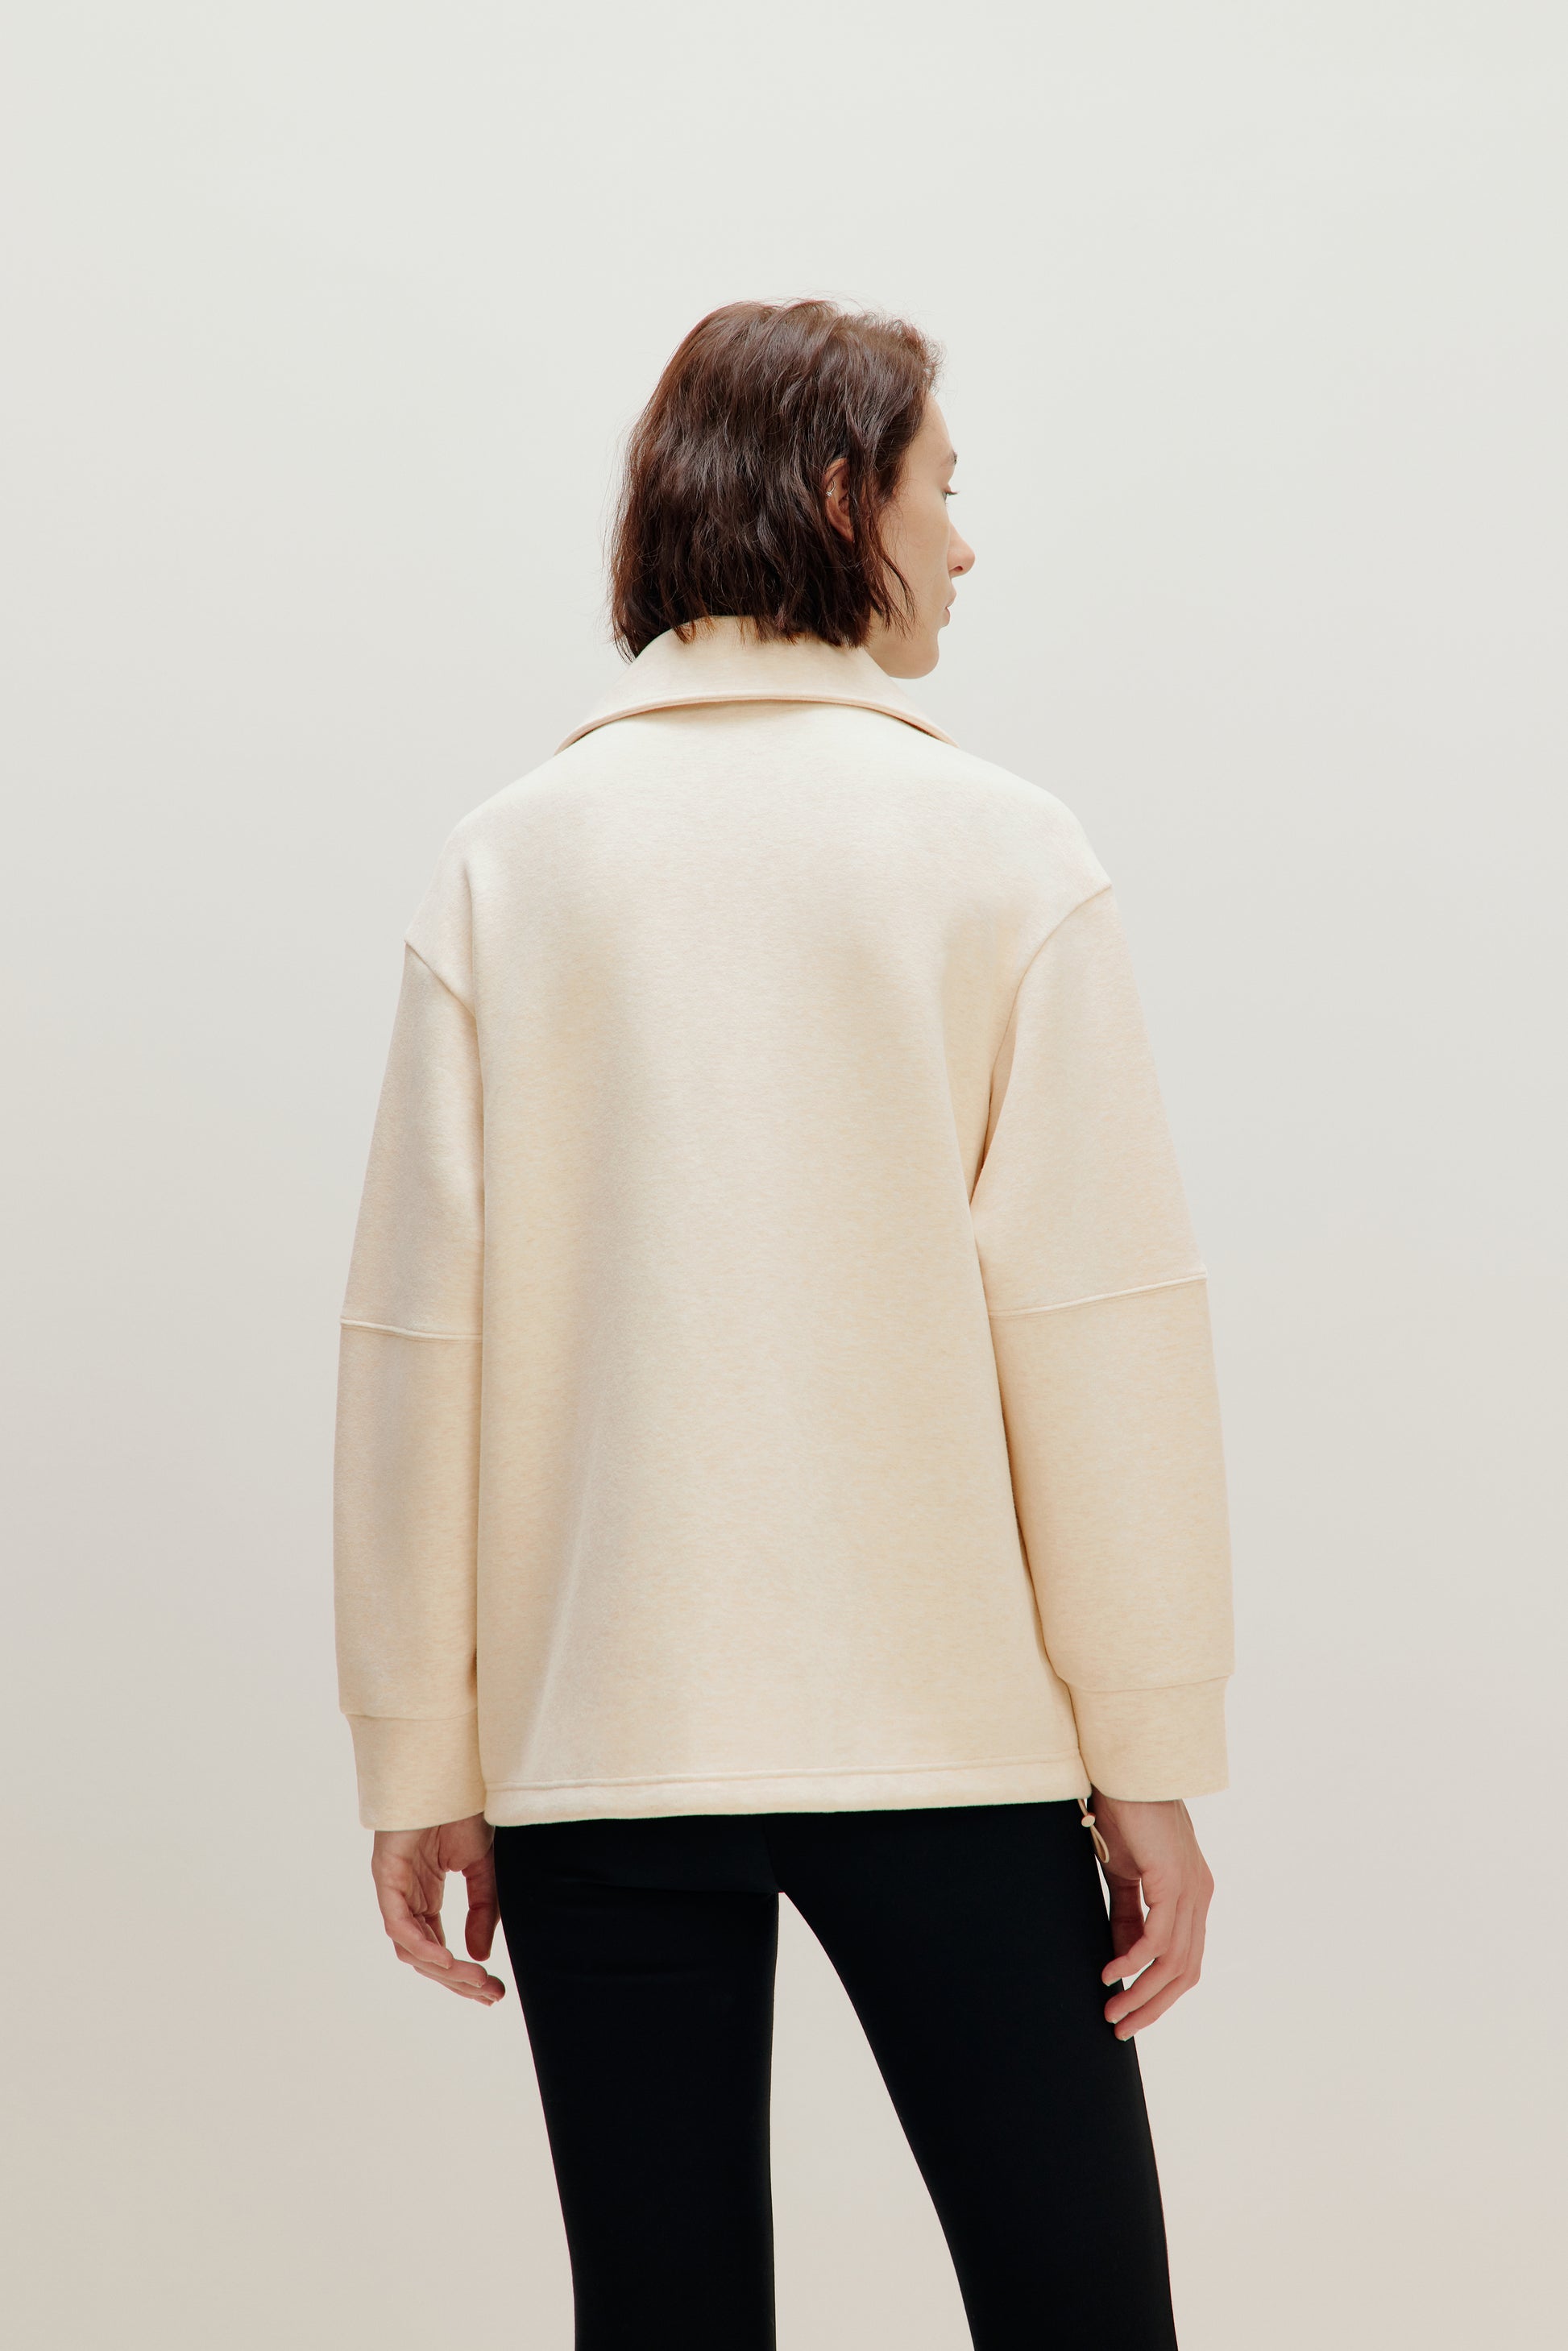 woman with off white jacket from the back